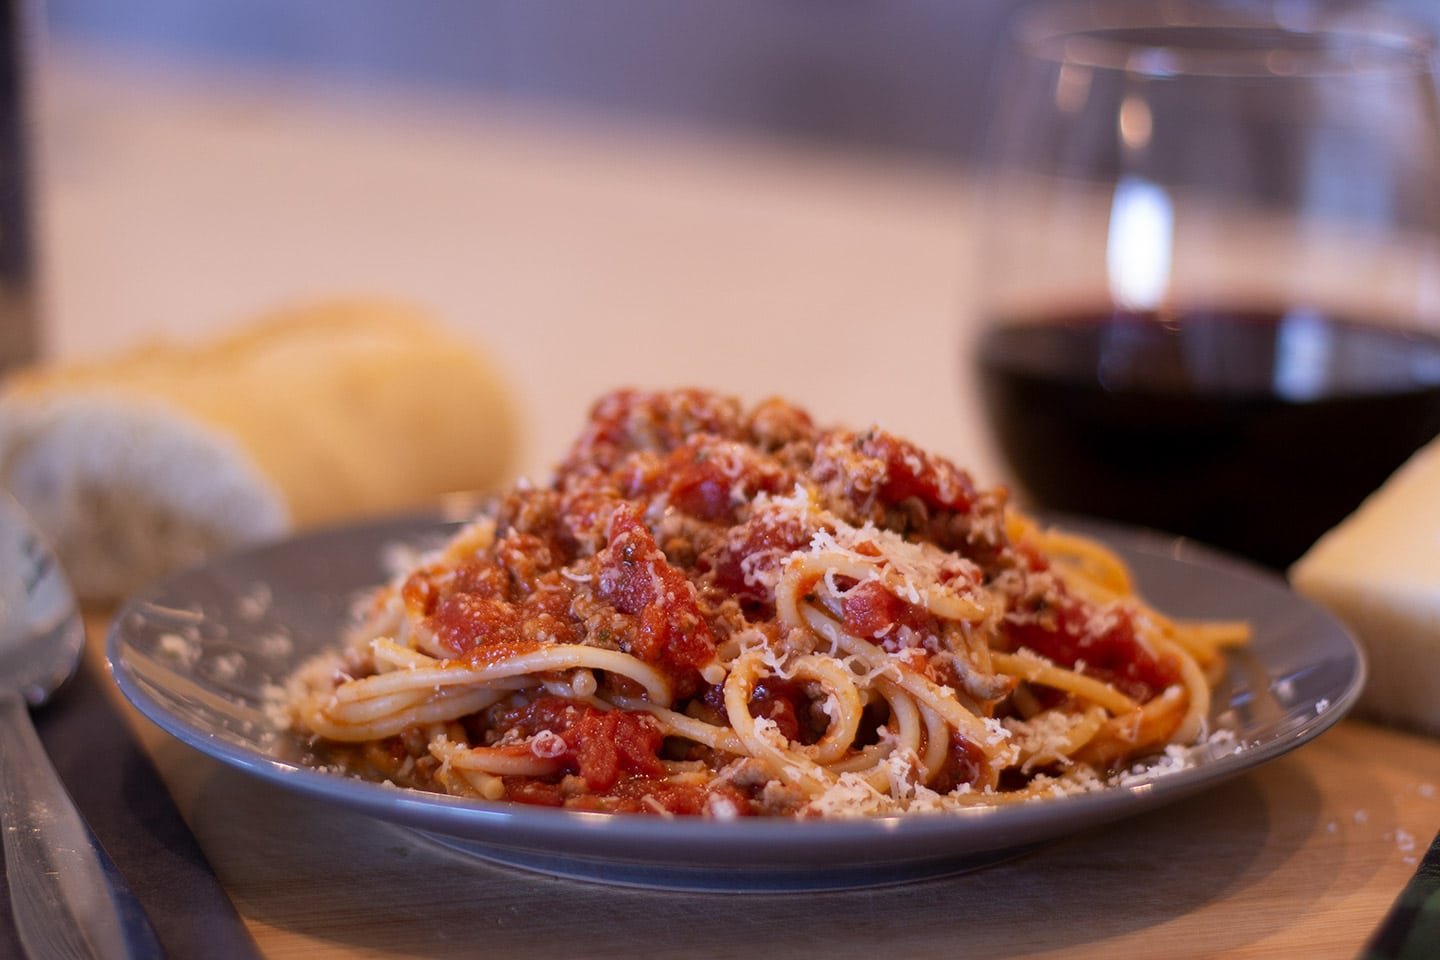 Spaghetti and meat sauce on a plate with a glass of wine